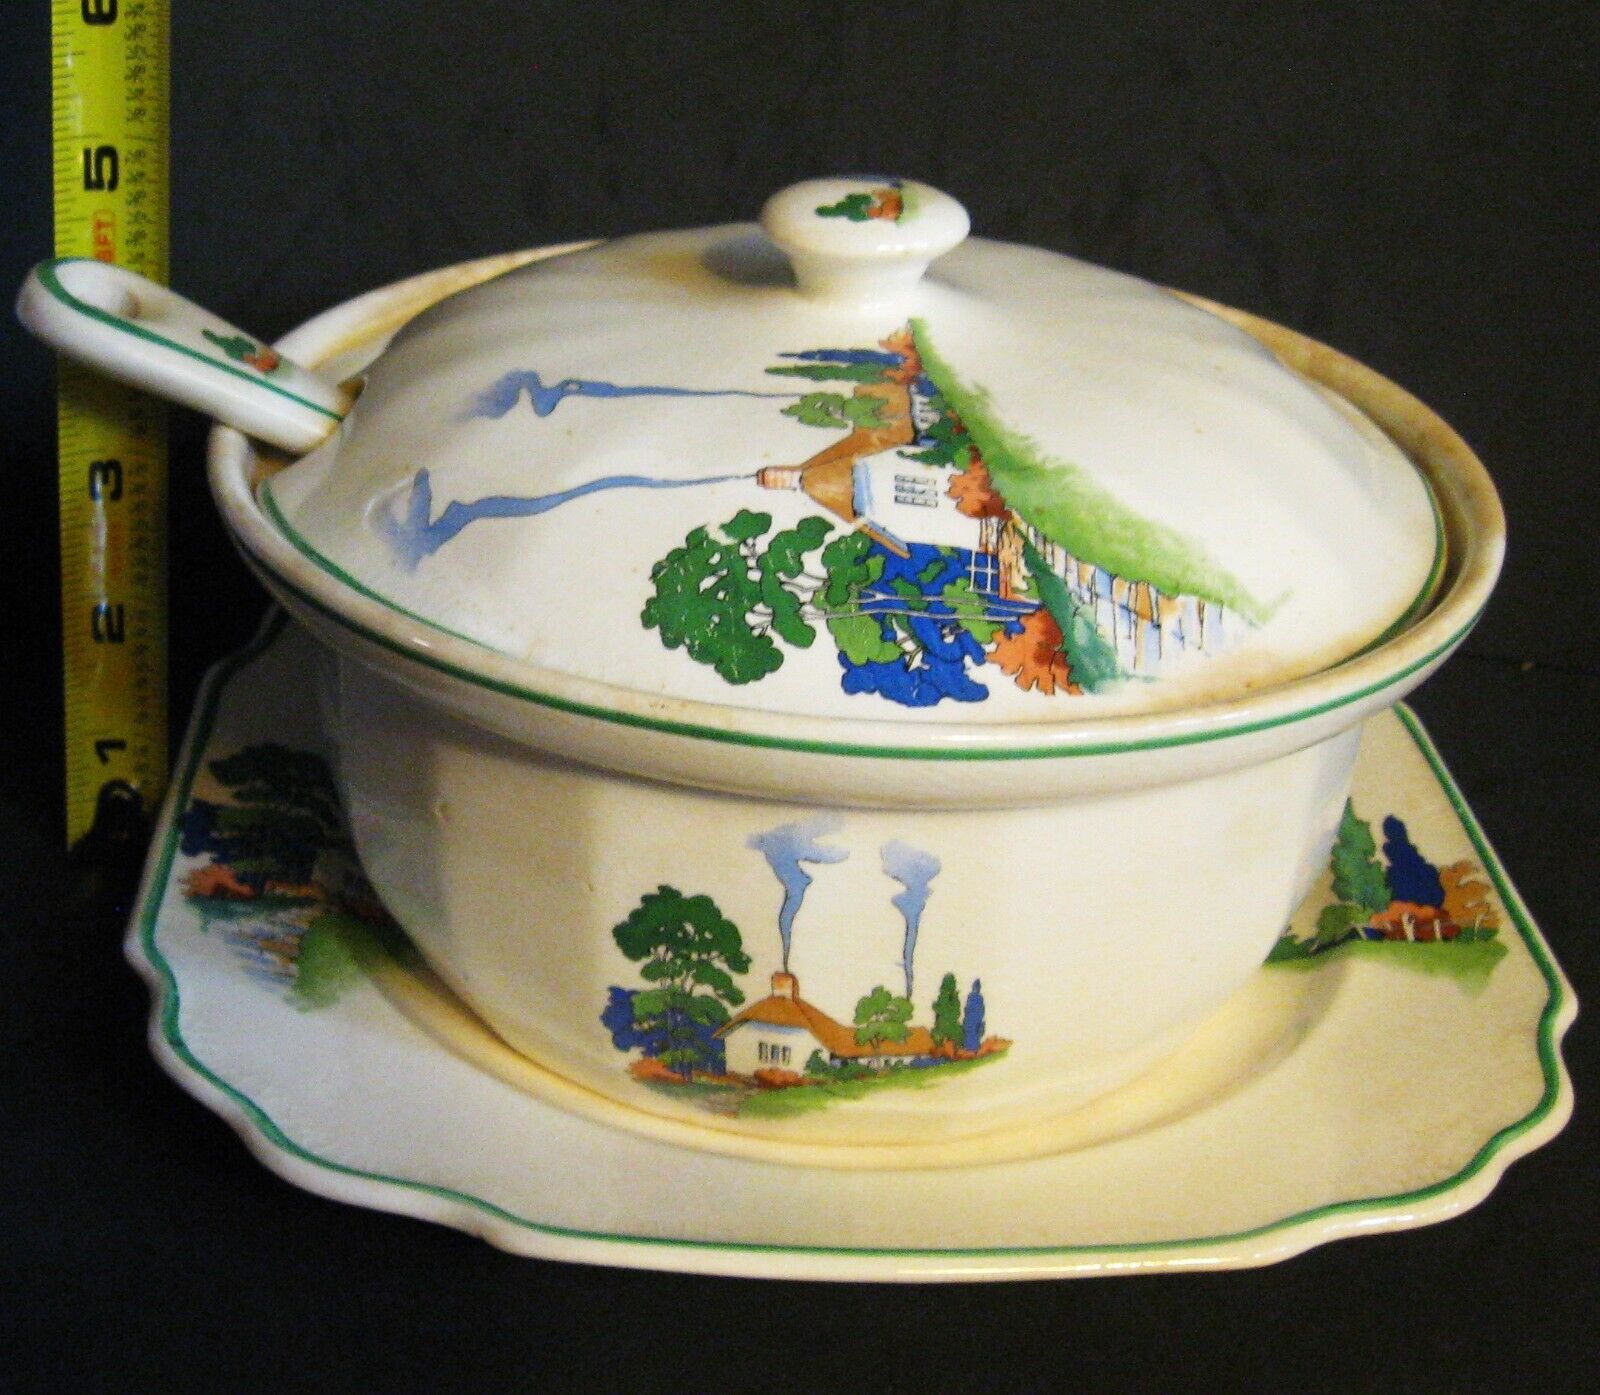 Thatched Roof Cottage Soup Tureen, Cover, Spoon and Underplate Harker Pottery